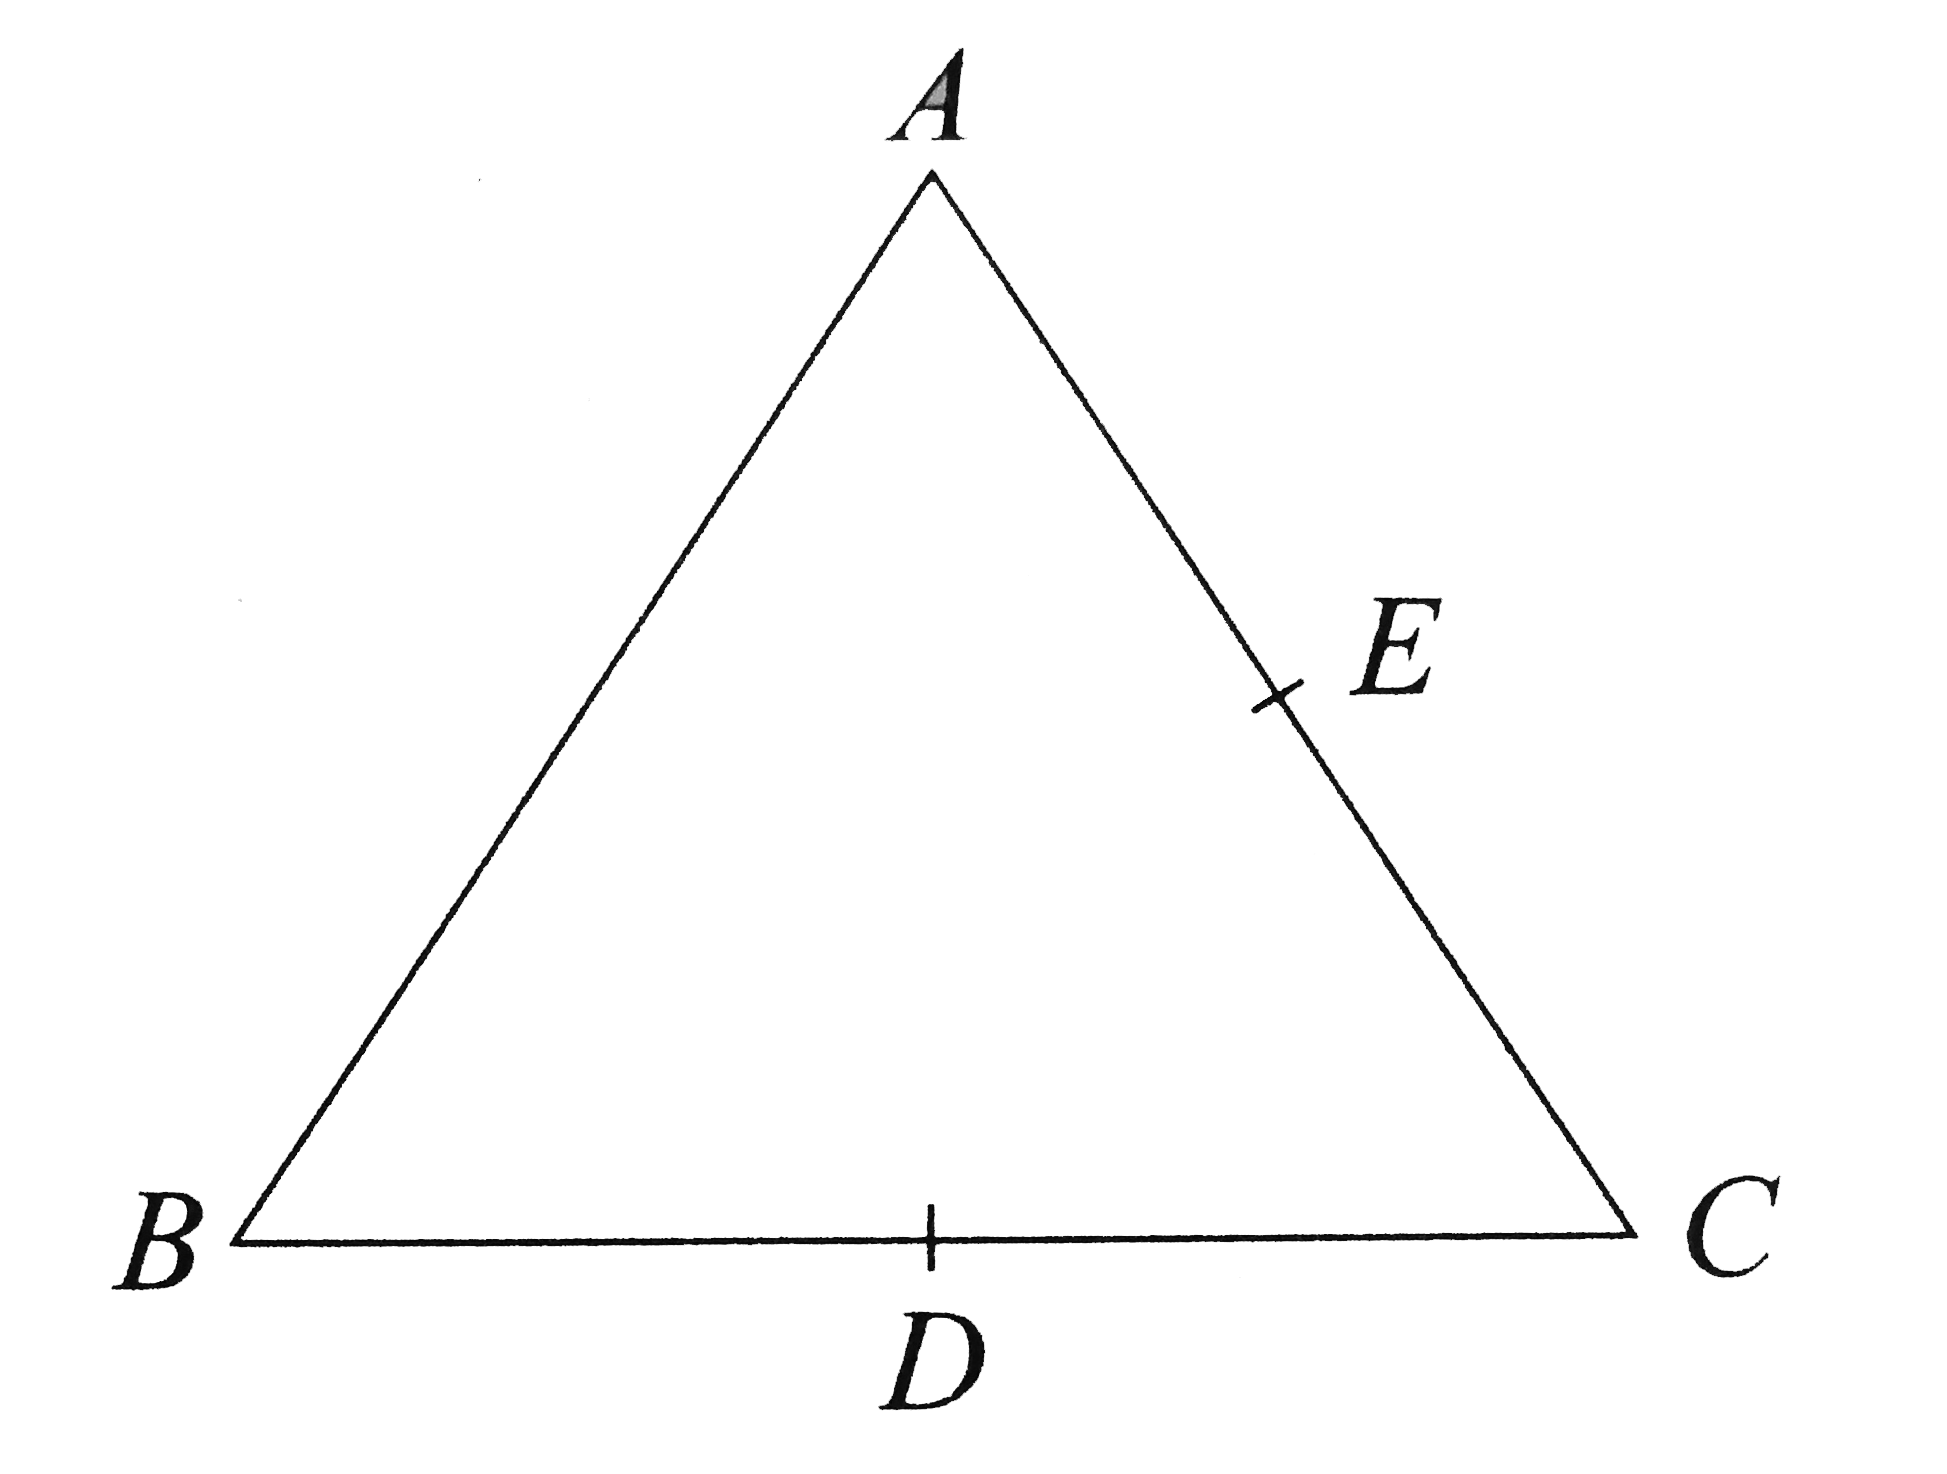 Three cahrges each+q, are placed at the corners of an isosceles trinagle ABC of sides BC and AC, 2a, D and E are the mid-points of BC and CA. The work done in taking a charge Q from D to E is